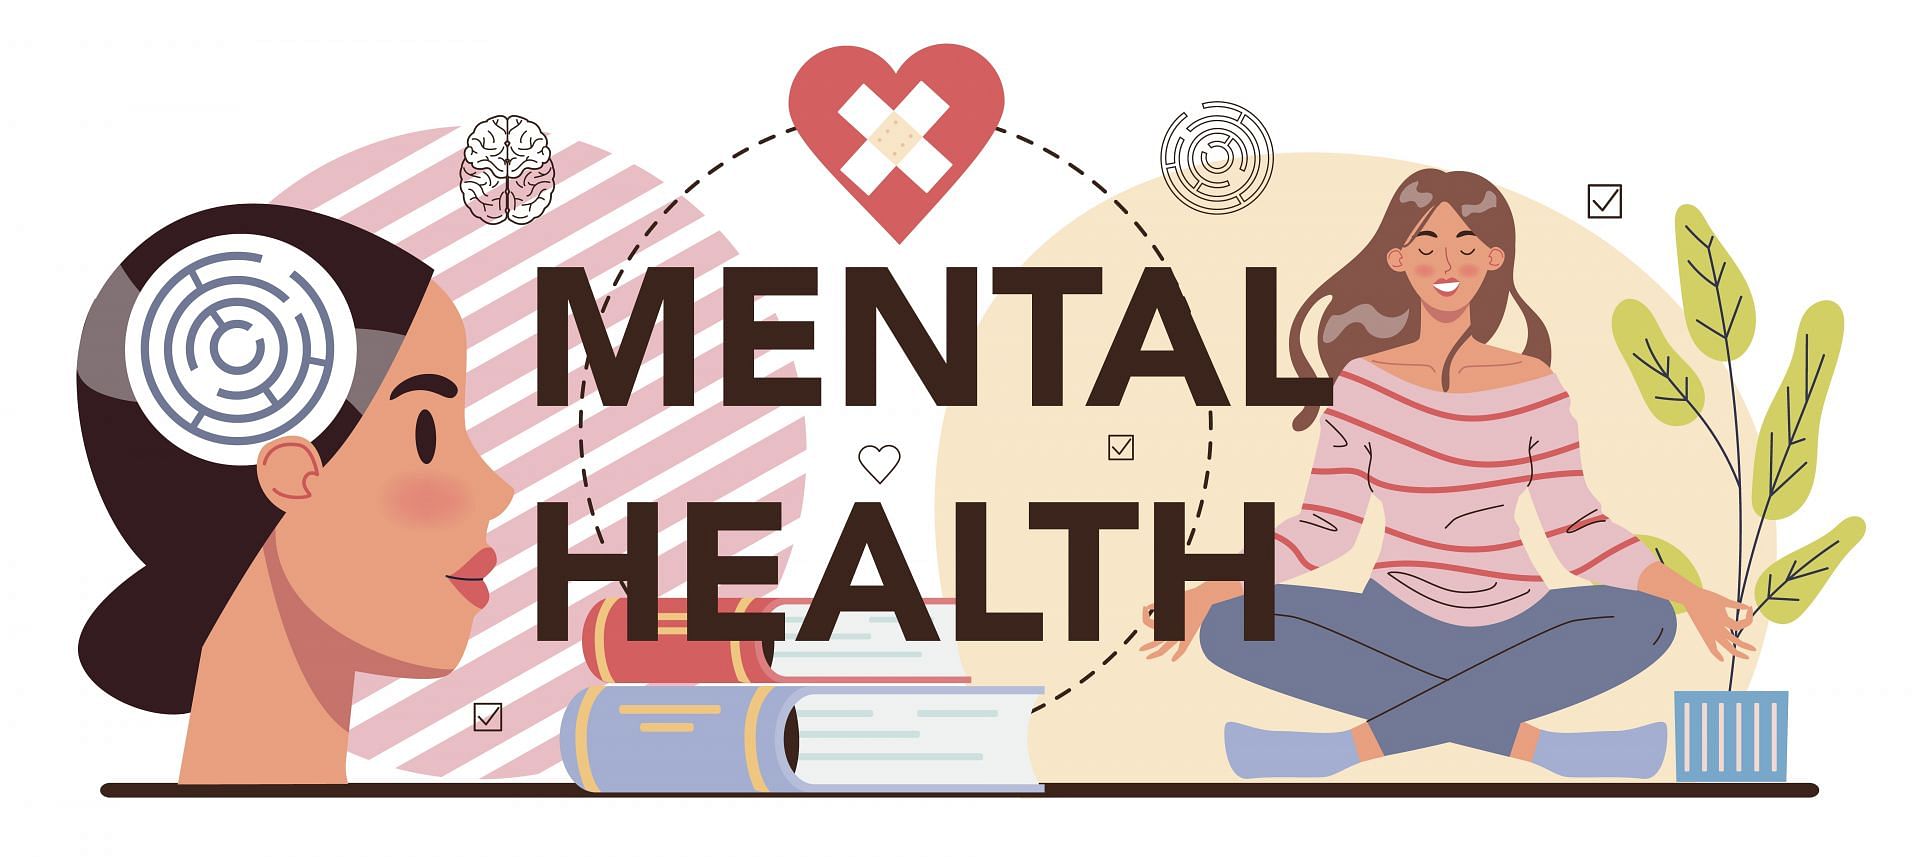 Mental health is not only personal but also societal. (Image via Freepik/Vector)